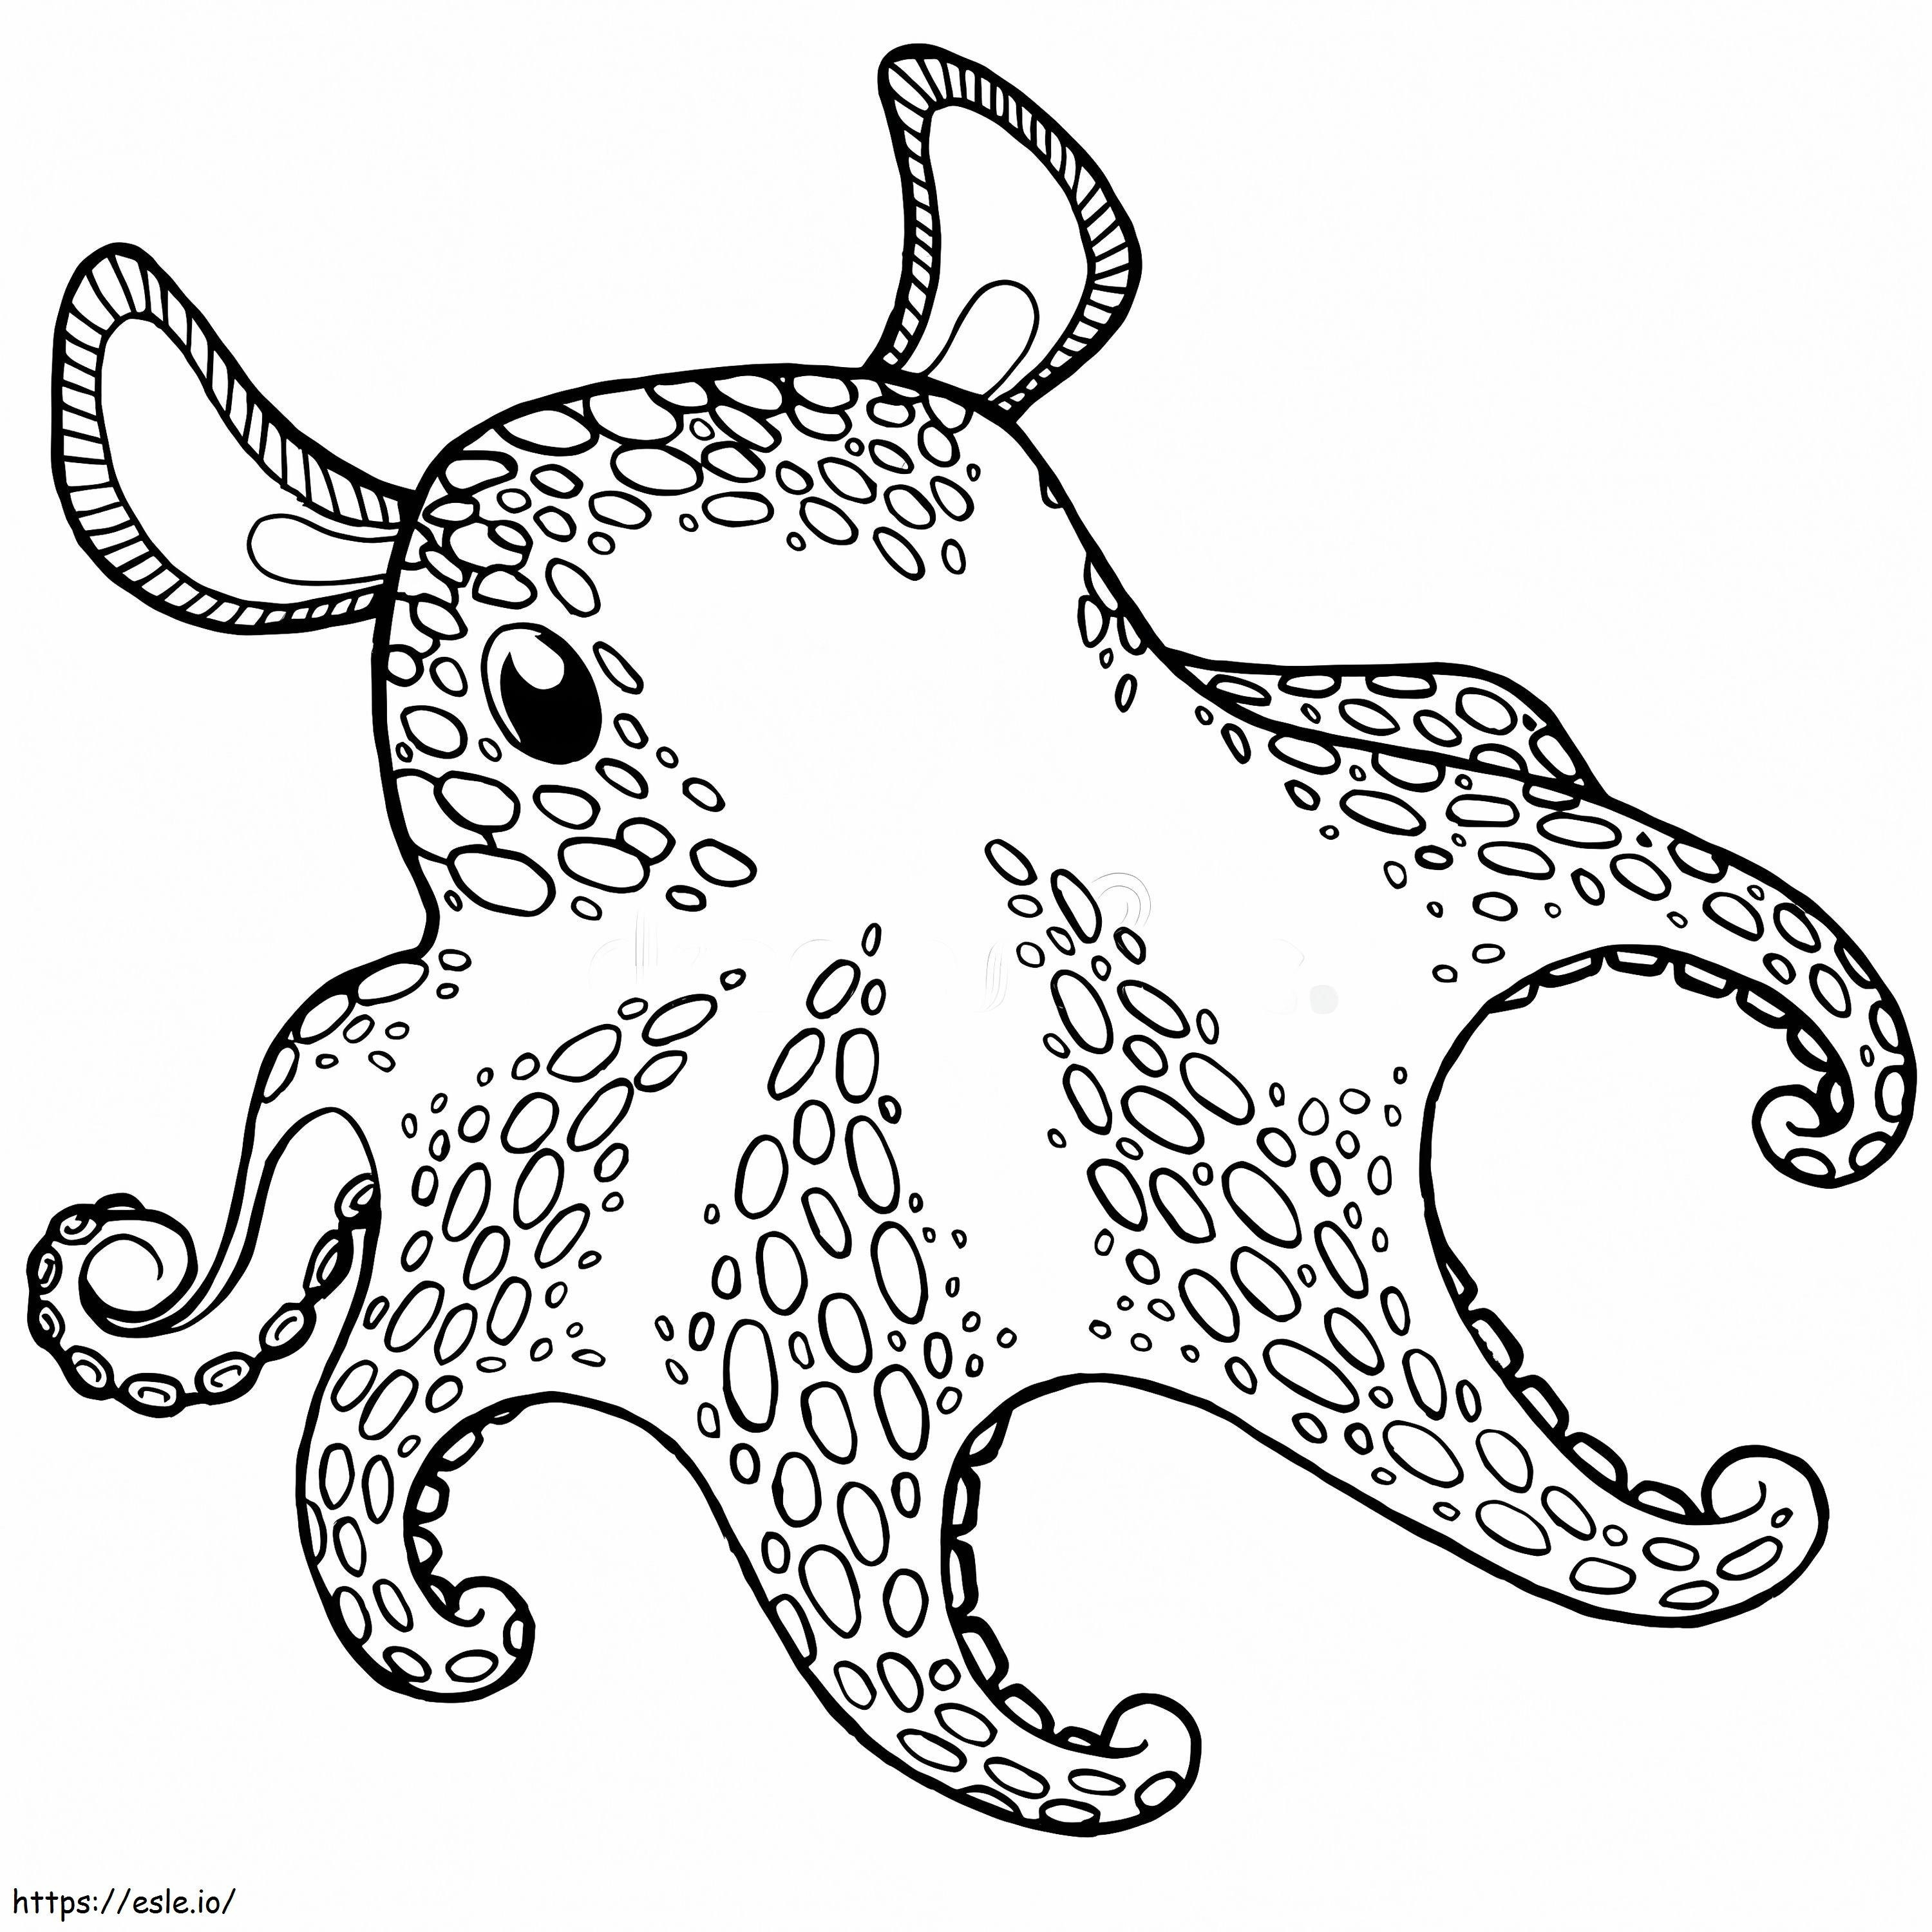 Good Octopus coloring page